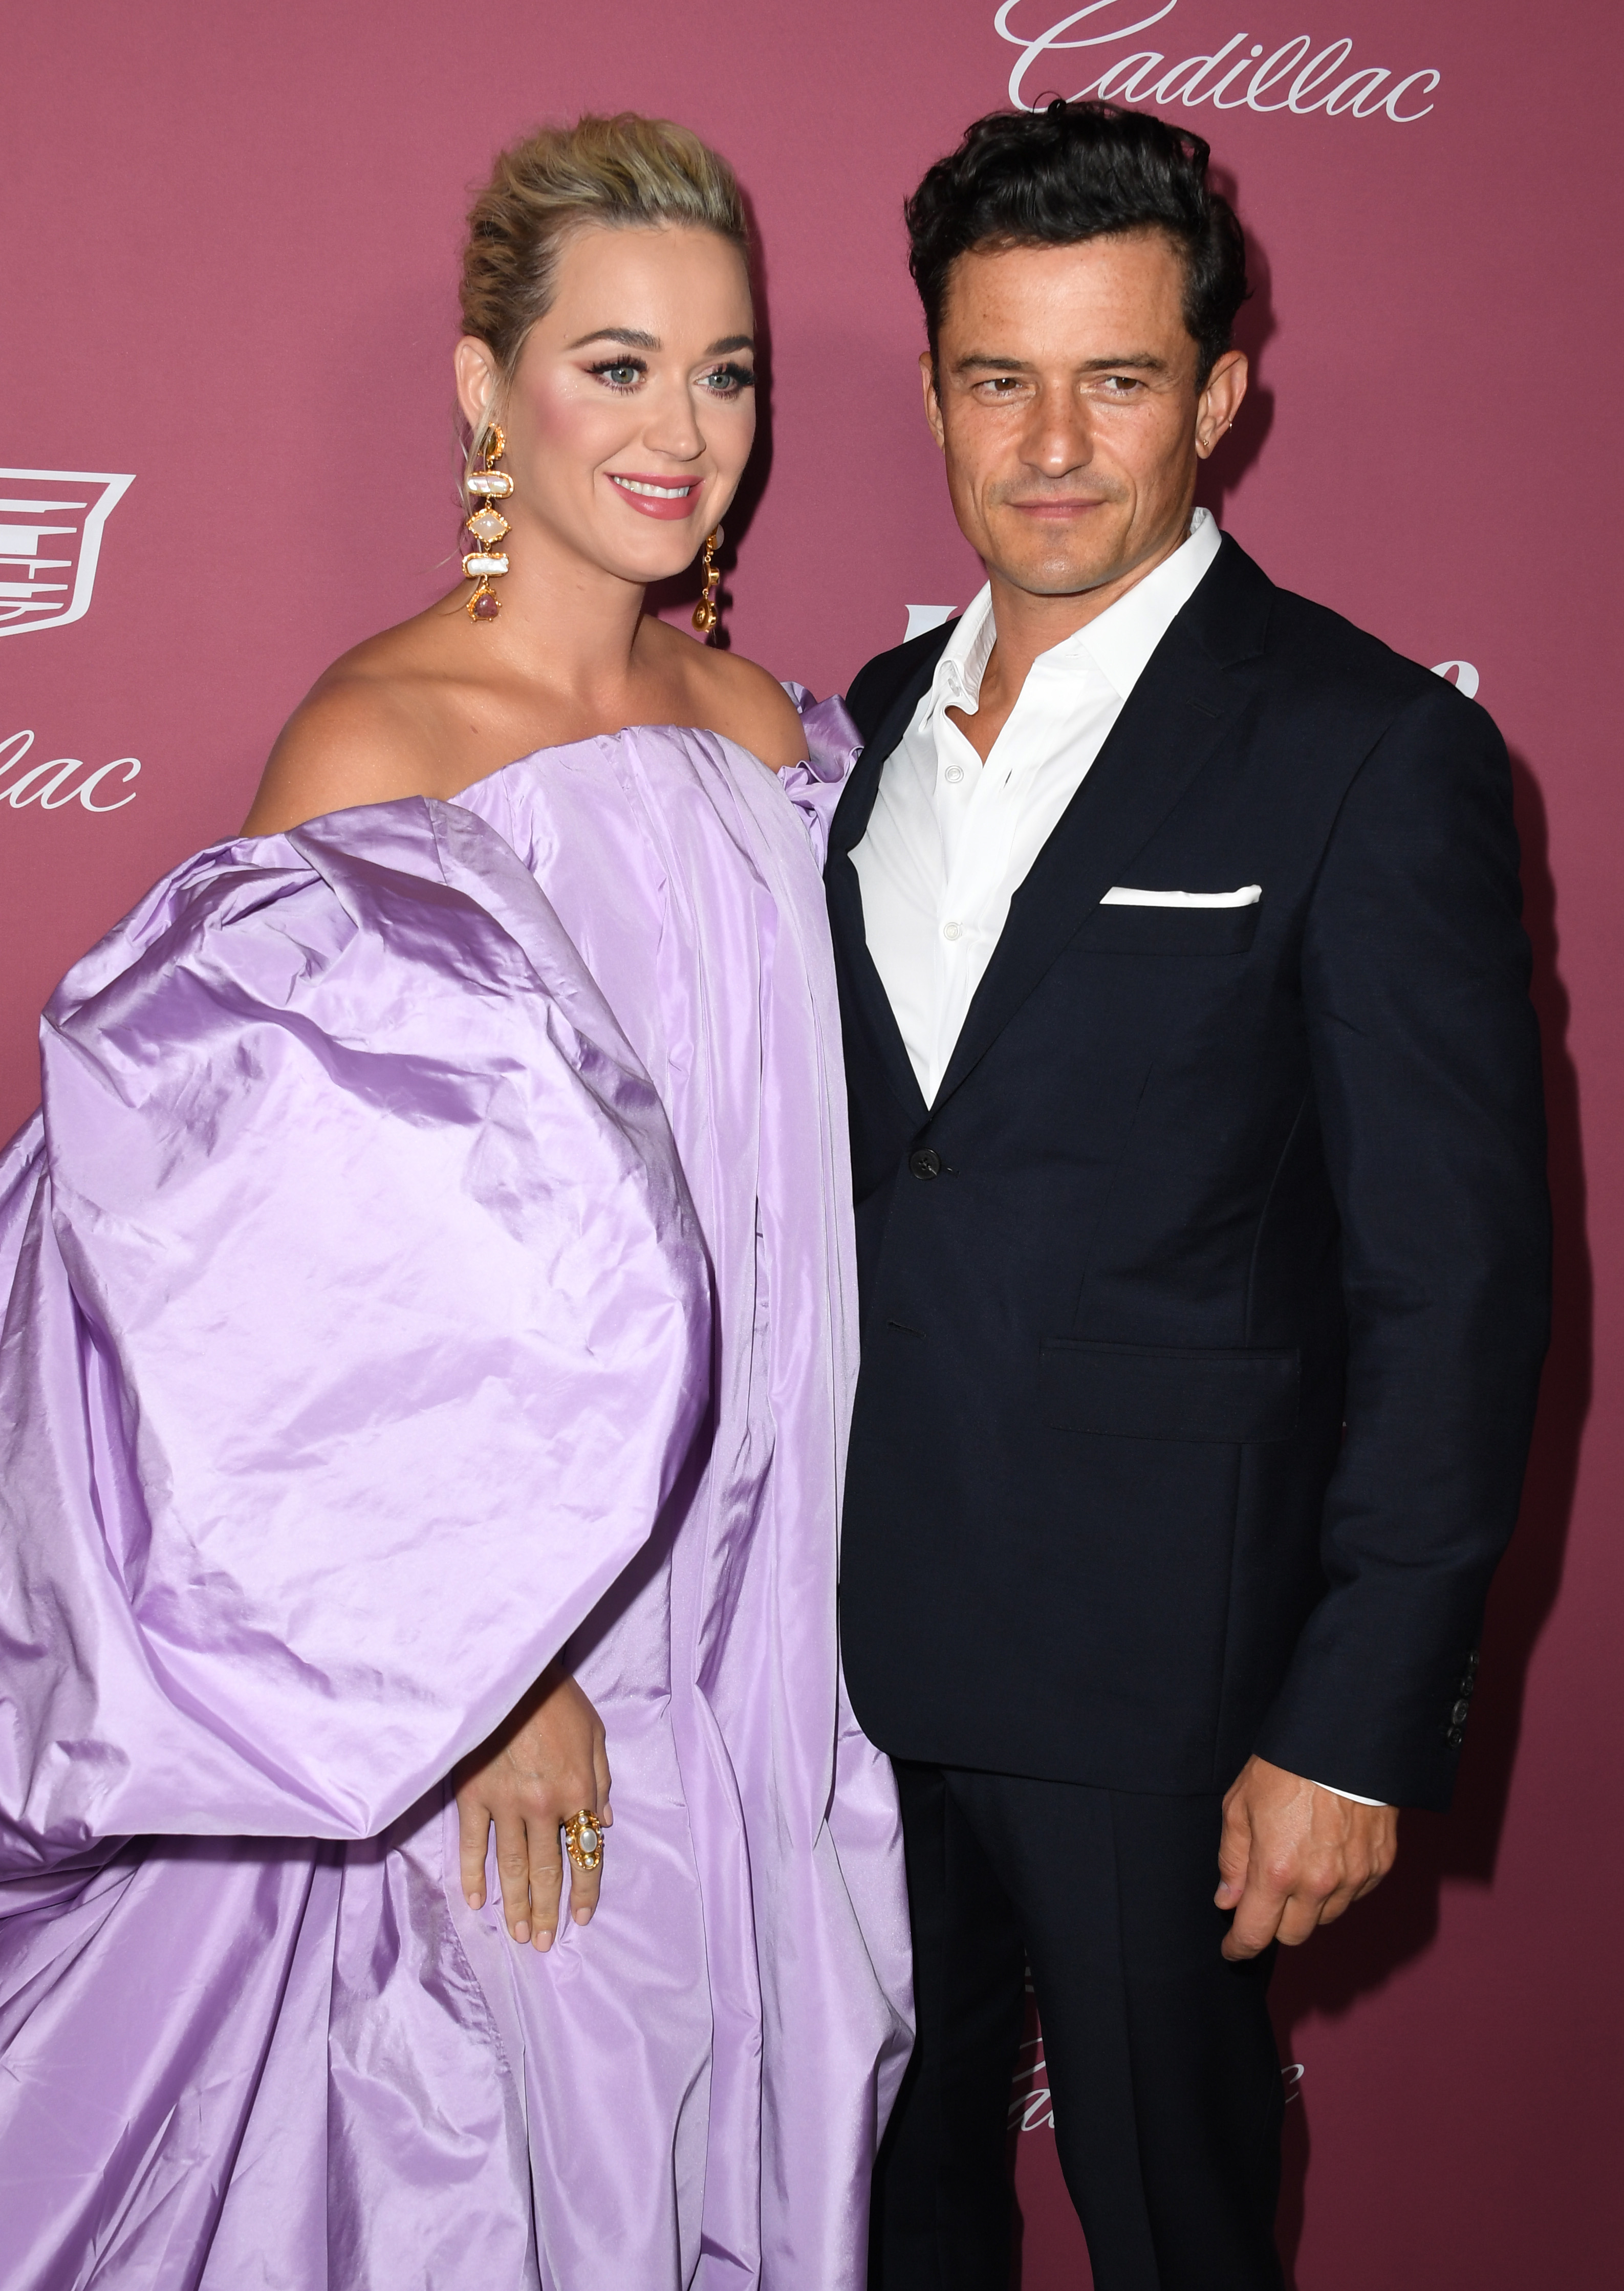 Katy recently opened up about wanting to expand her family with fiance Orlando Bloom, with whom she shares a 3-year-old daughter